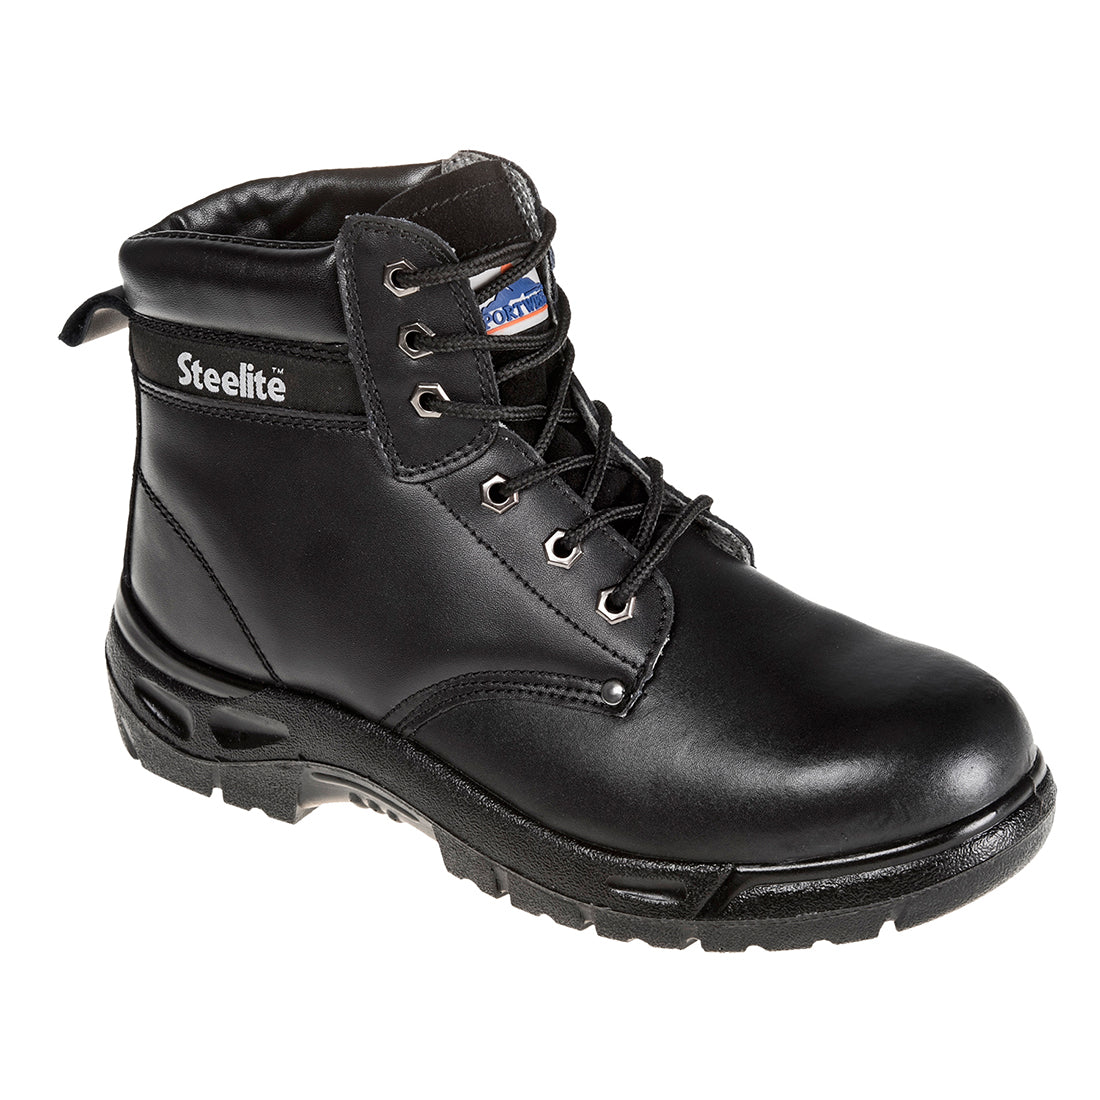 PORTWEST SIZE 6.5 / 40 FW03 Black Steelite Boot S3 Steel toe safety boot rigger